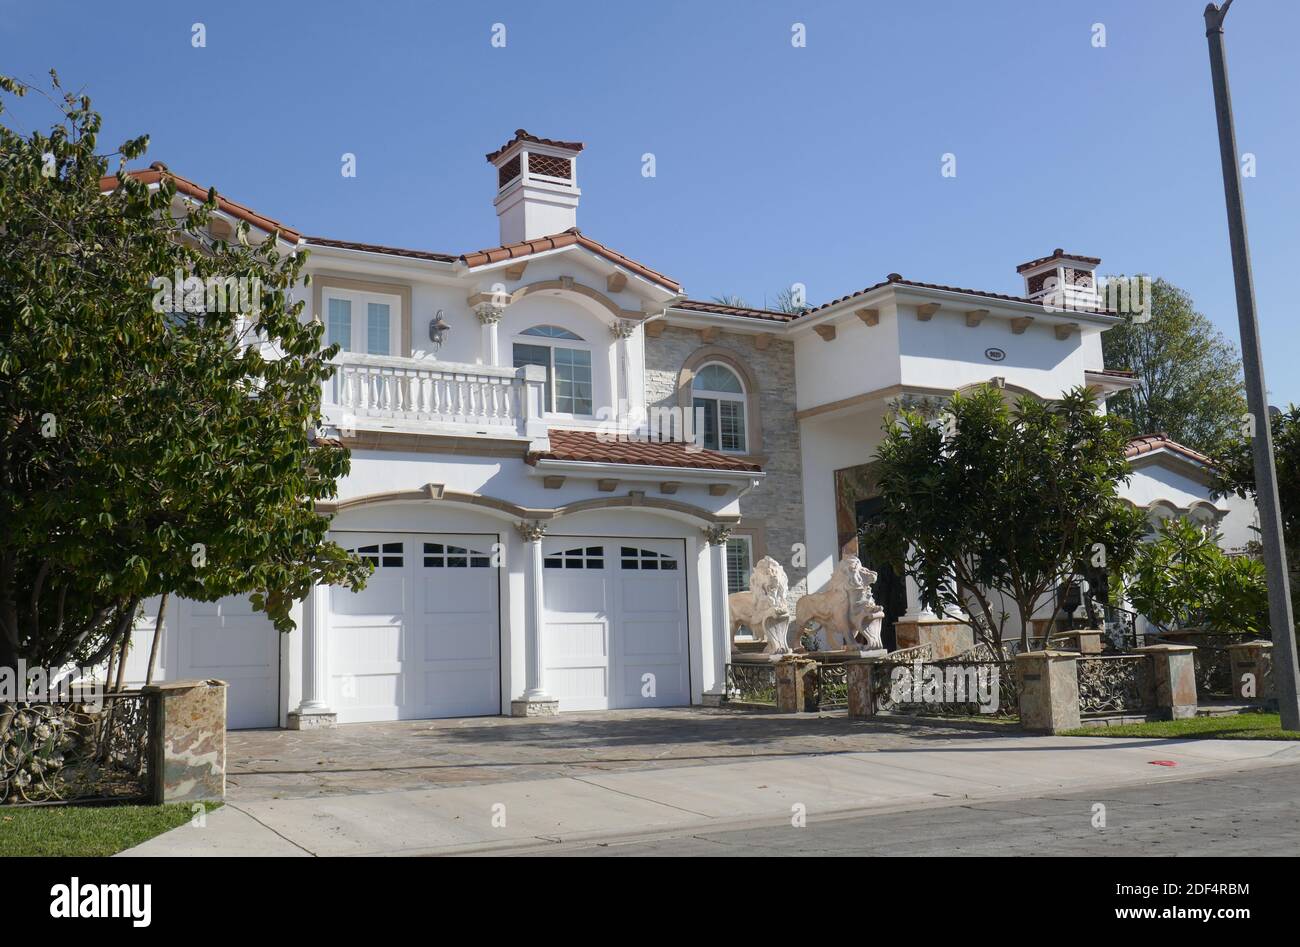 Downey, California, USA 2nd December 2020 A general view of atmosphere of former recording studio/home of singers/musicians Karen Carpenter and Richard Carpenter of The Carpenters Music Duo on December 2, 2020 at 9820 Newville Avenue in Downey, California, USA. Photo by Barry King/Alamy Stock Photo Stock Photo